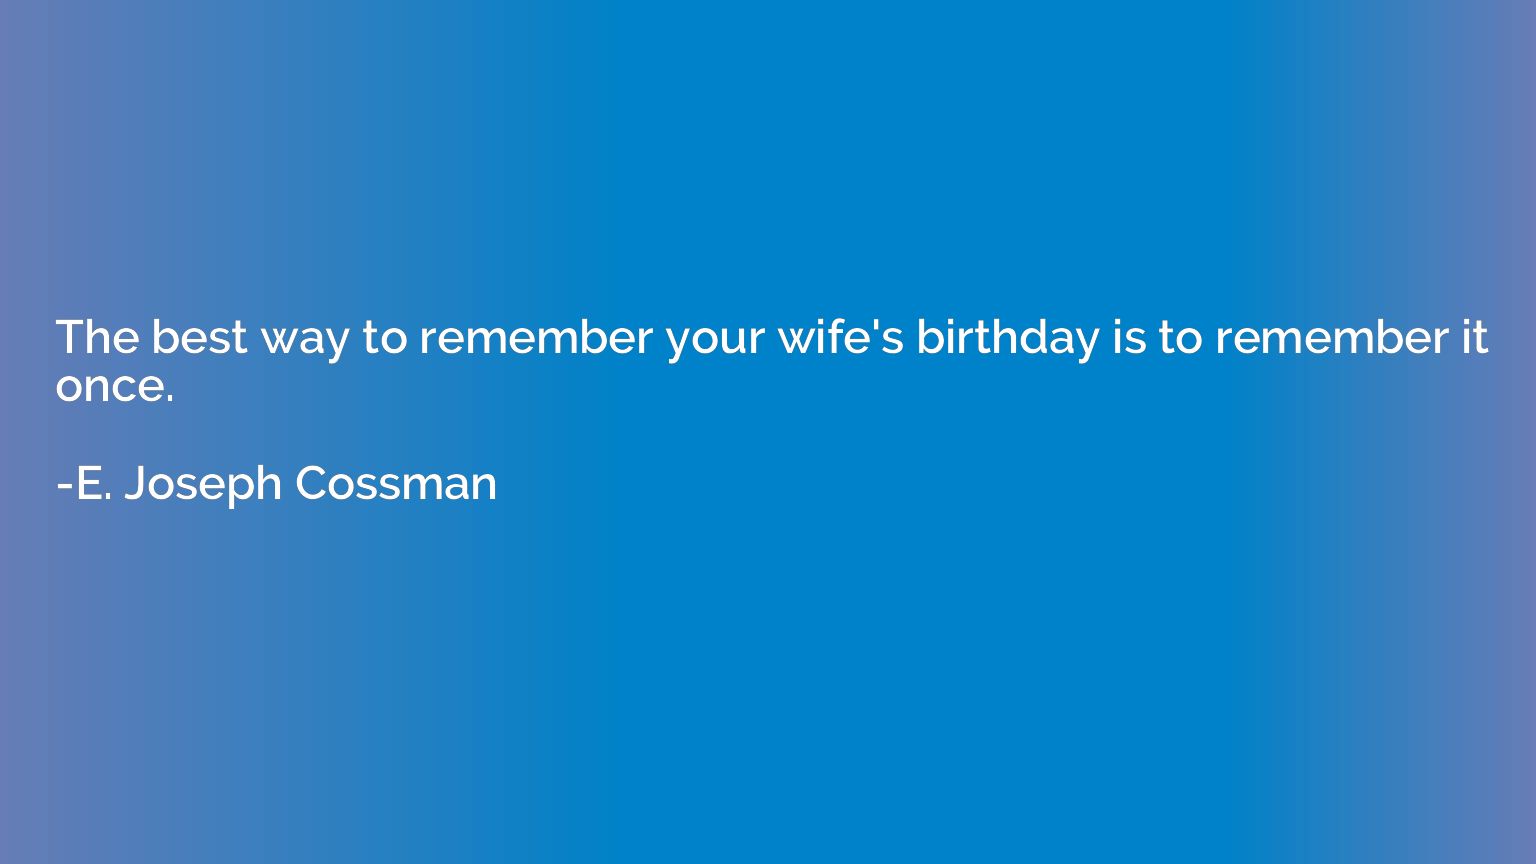 The best way to remember your wife's birthday is to remember